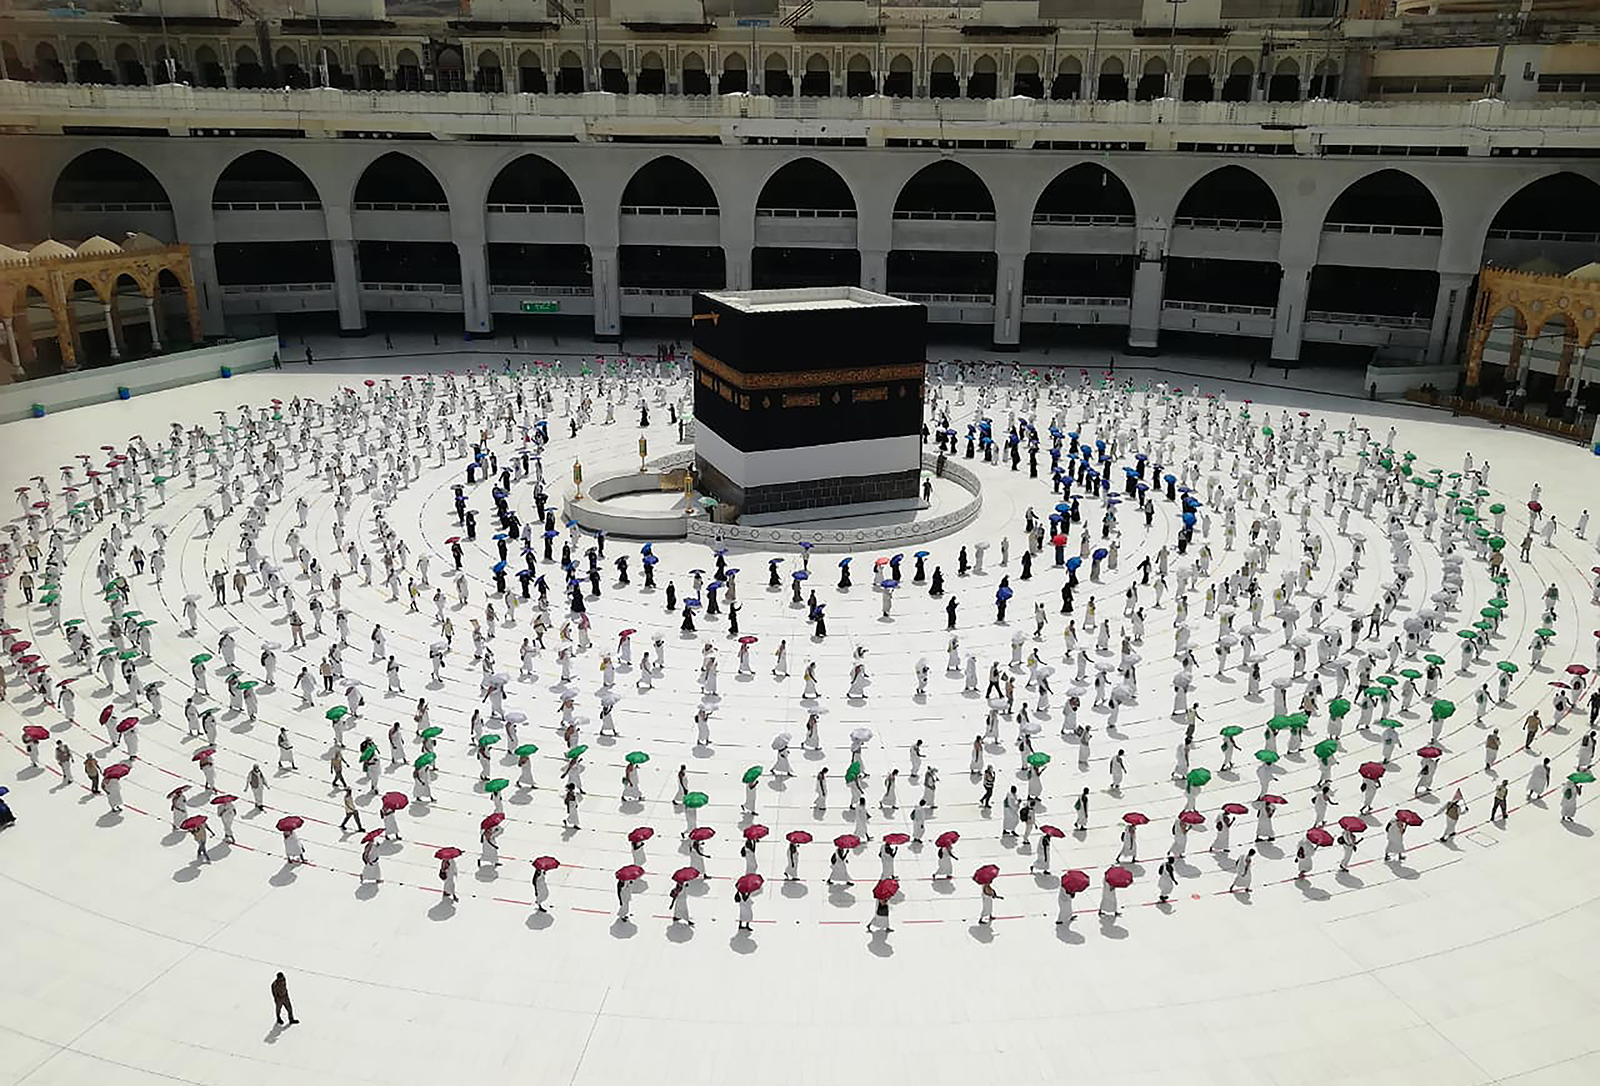 Hundreds of Muslim pilgrims surround the Kaaba, the cubic building of the Grand Mosque, as they observe social distancing to protect against the coronavirus, in the Muslim holy city of Mecca, Saudi Arabia, July 29, 2020. During the first rites of hajj, Muslims circle the Kaaba seven times counter-clockwise while reciting supplications to God, then walk between two hills where Ibrahim's wife, Hagar, is said to have ran as she fetched water for her dying son before God caused a well to flow to that day.  (AP Photo)